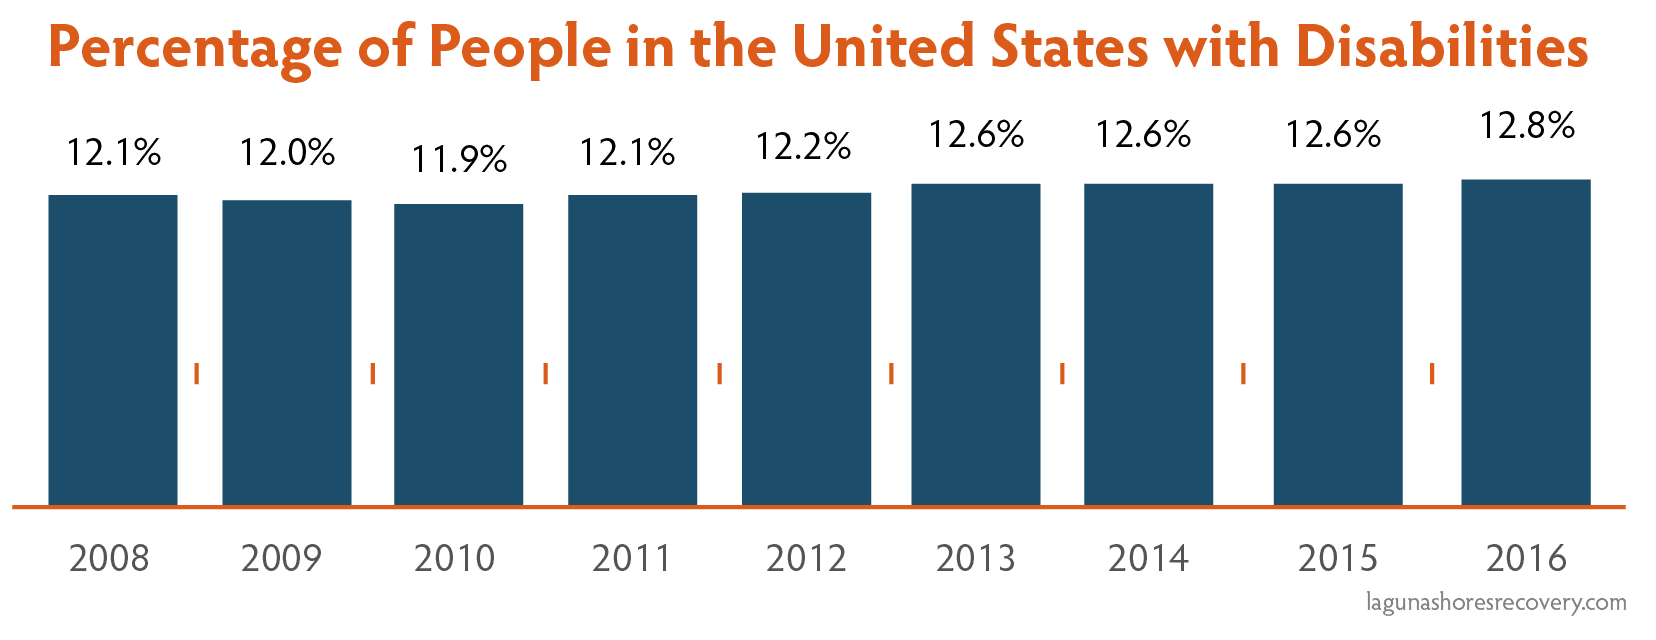 how many people are in the u.s.a